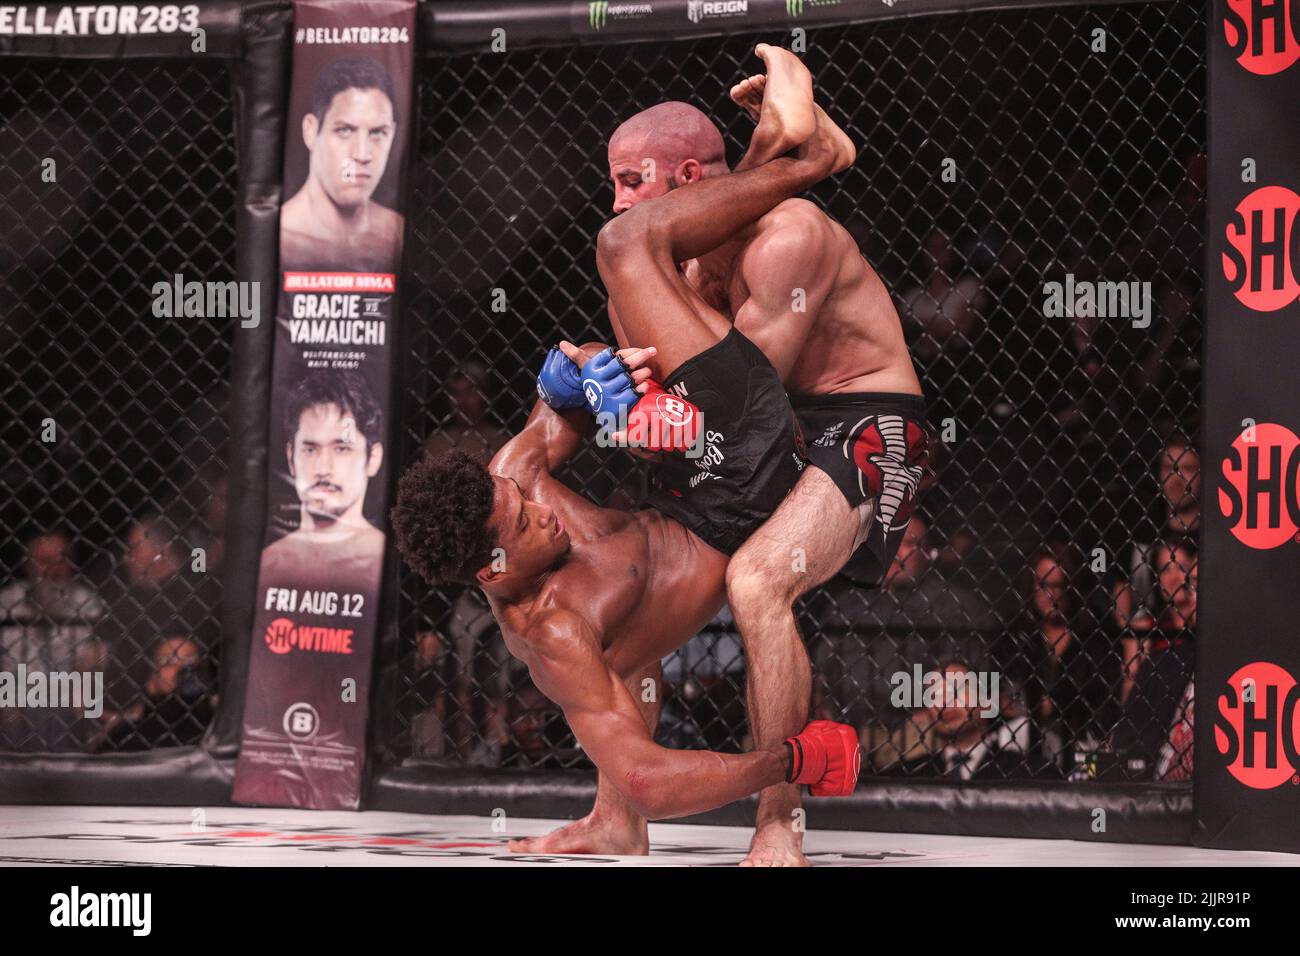 Mark Coates postures up against Jaylon Bates to break down the triangle at Bellator 283. Jaylon Bates wins by unanimous decision from the Emerald Quee Stock Photo